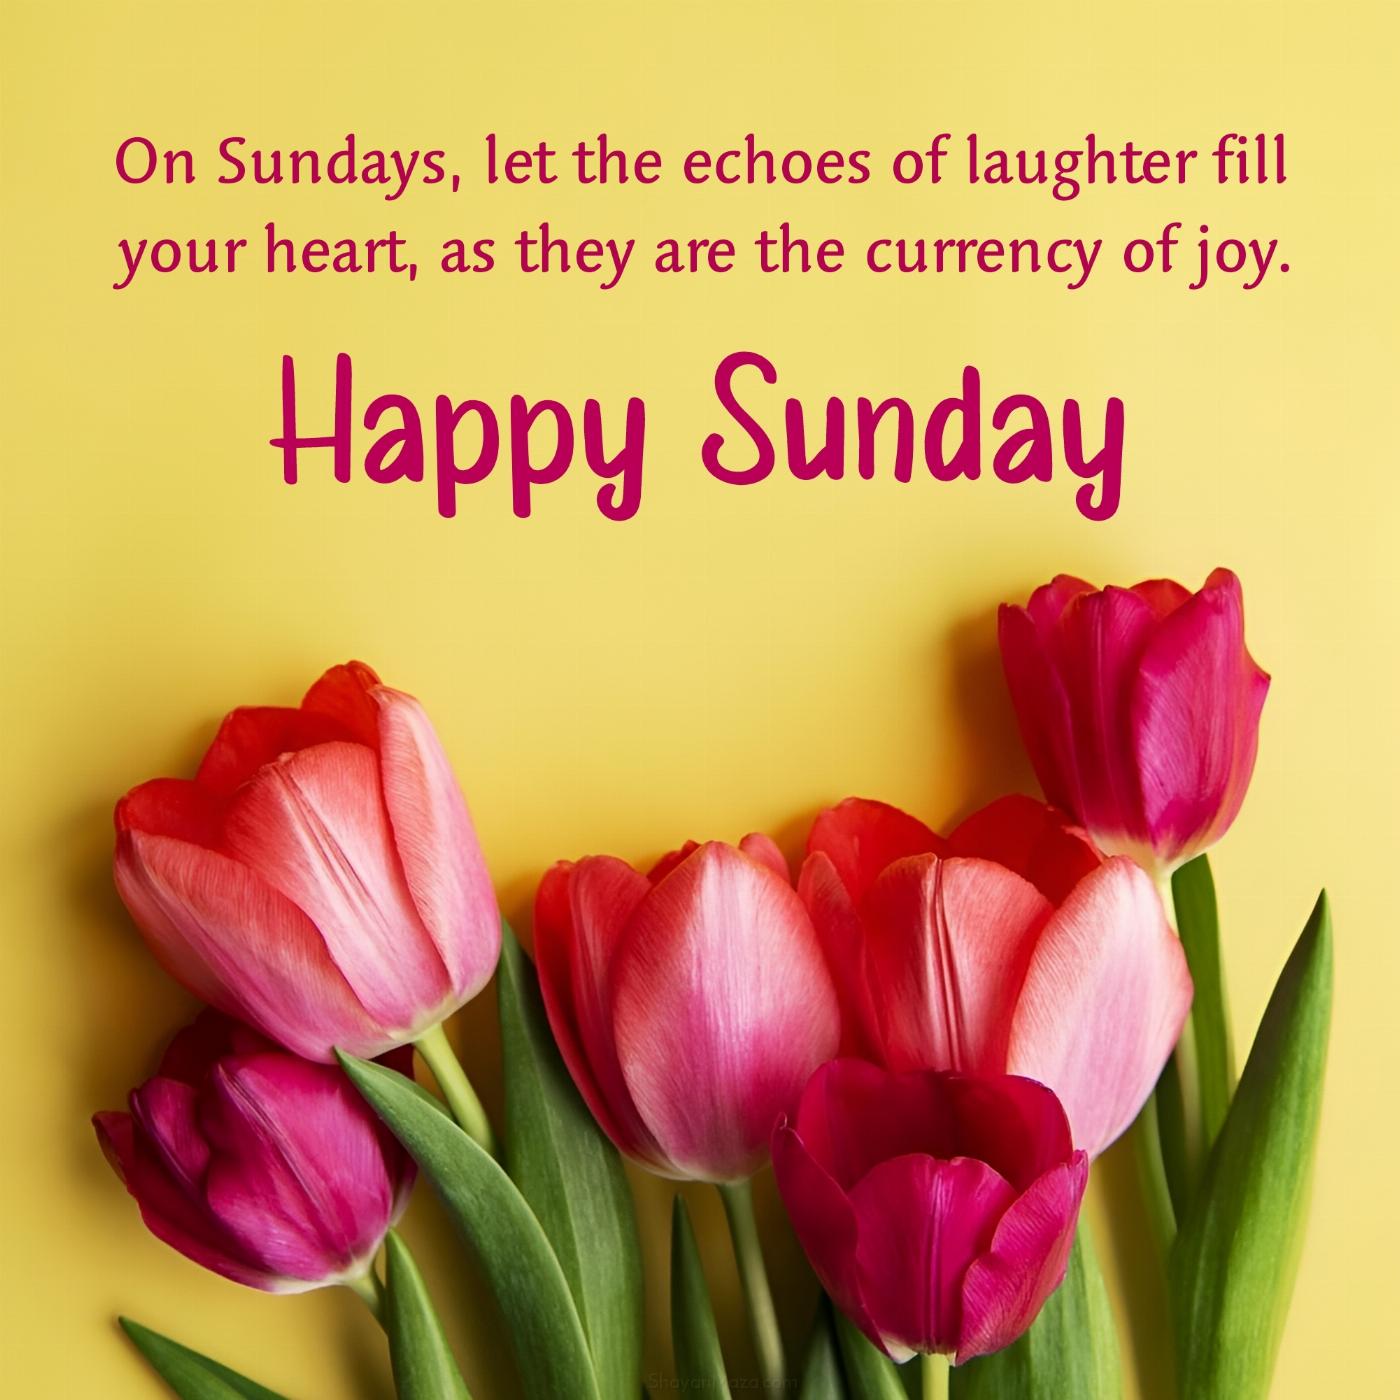 On Sundays let the echoes of laughter fill your heart